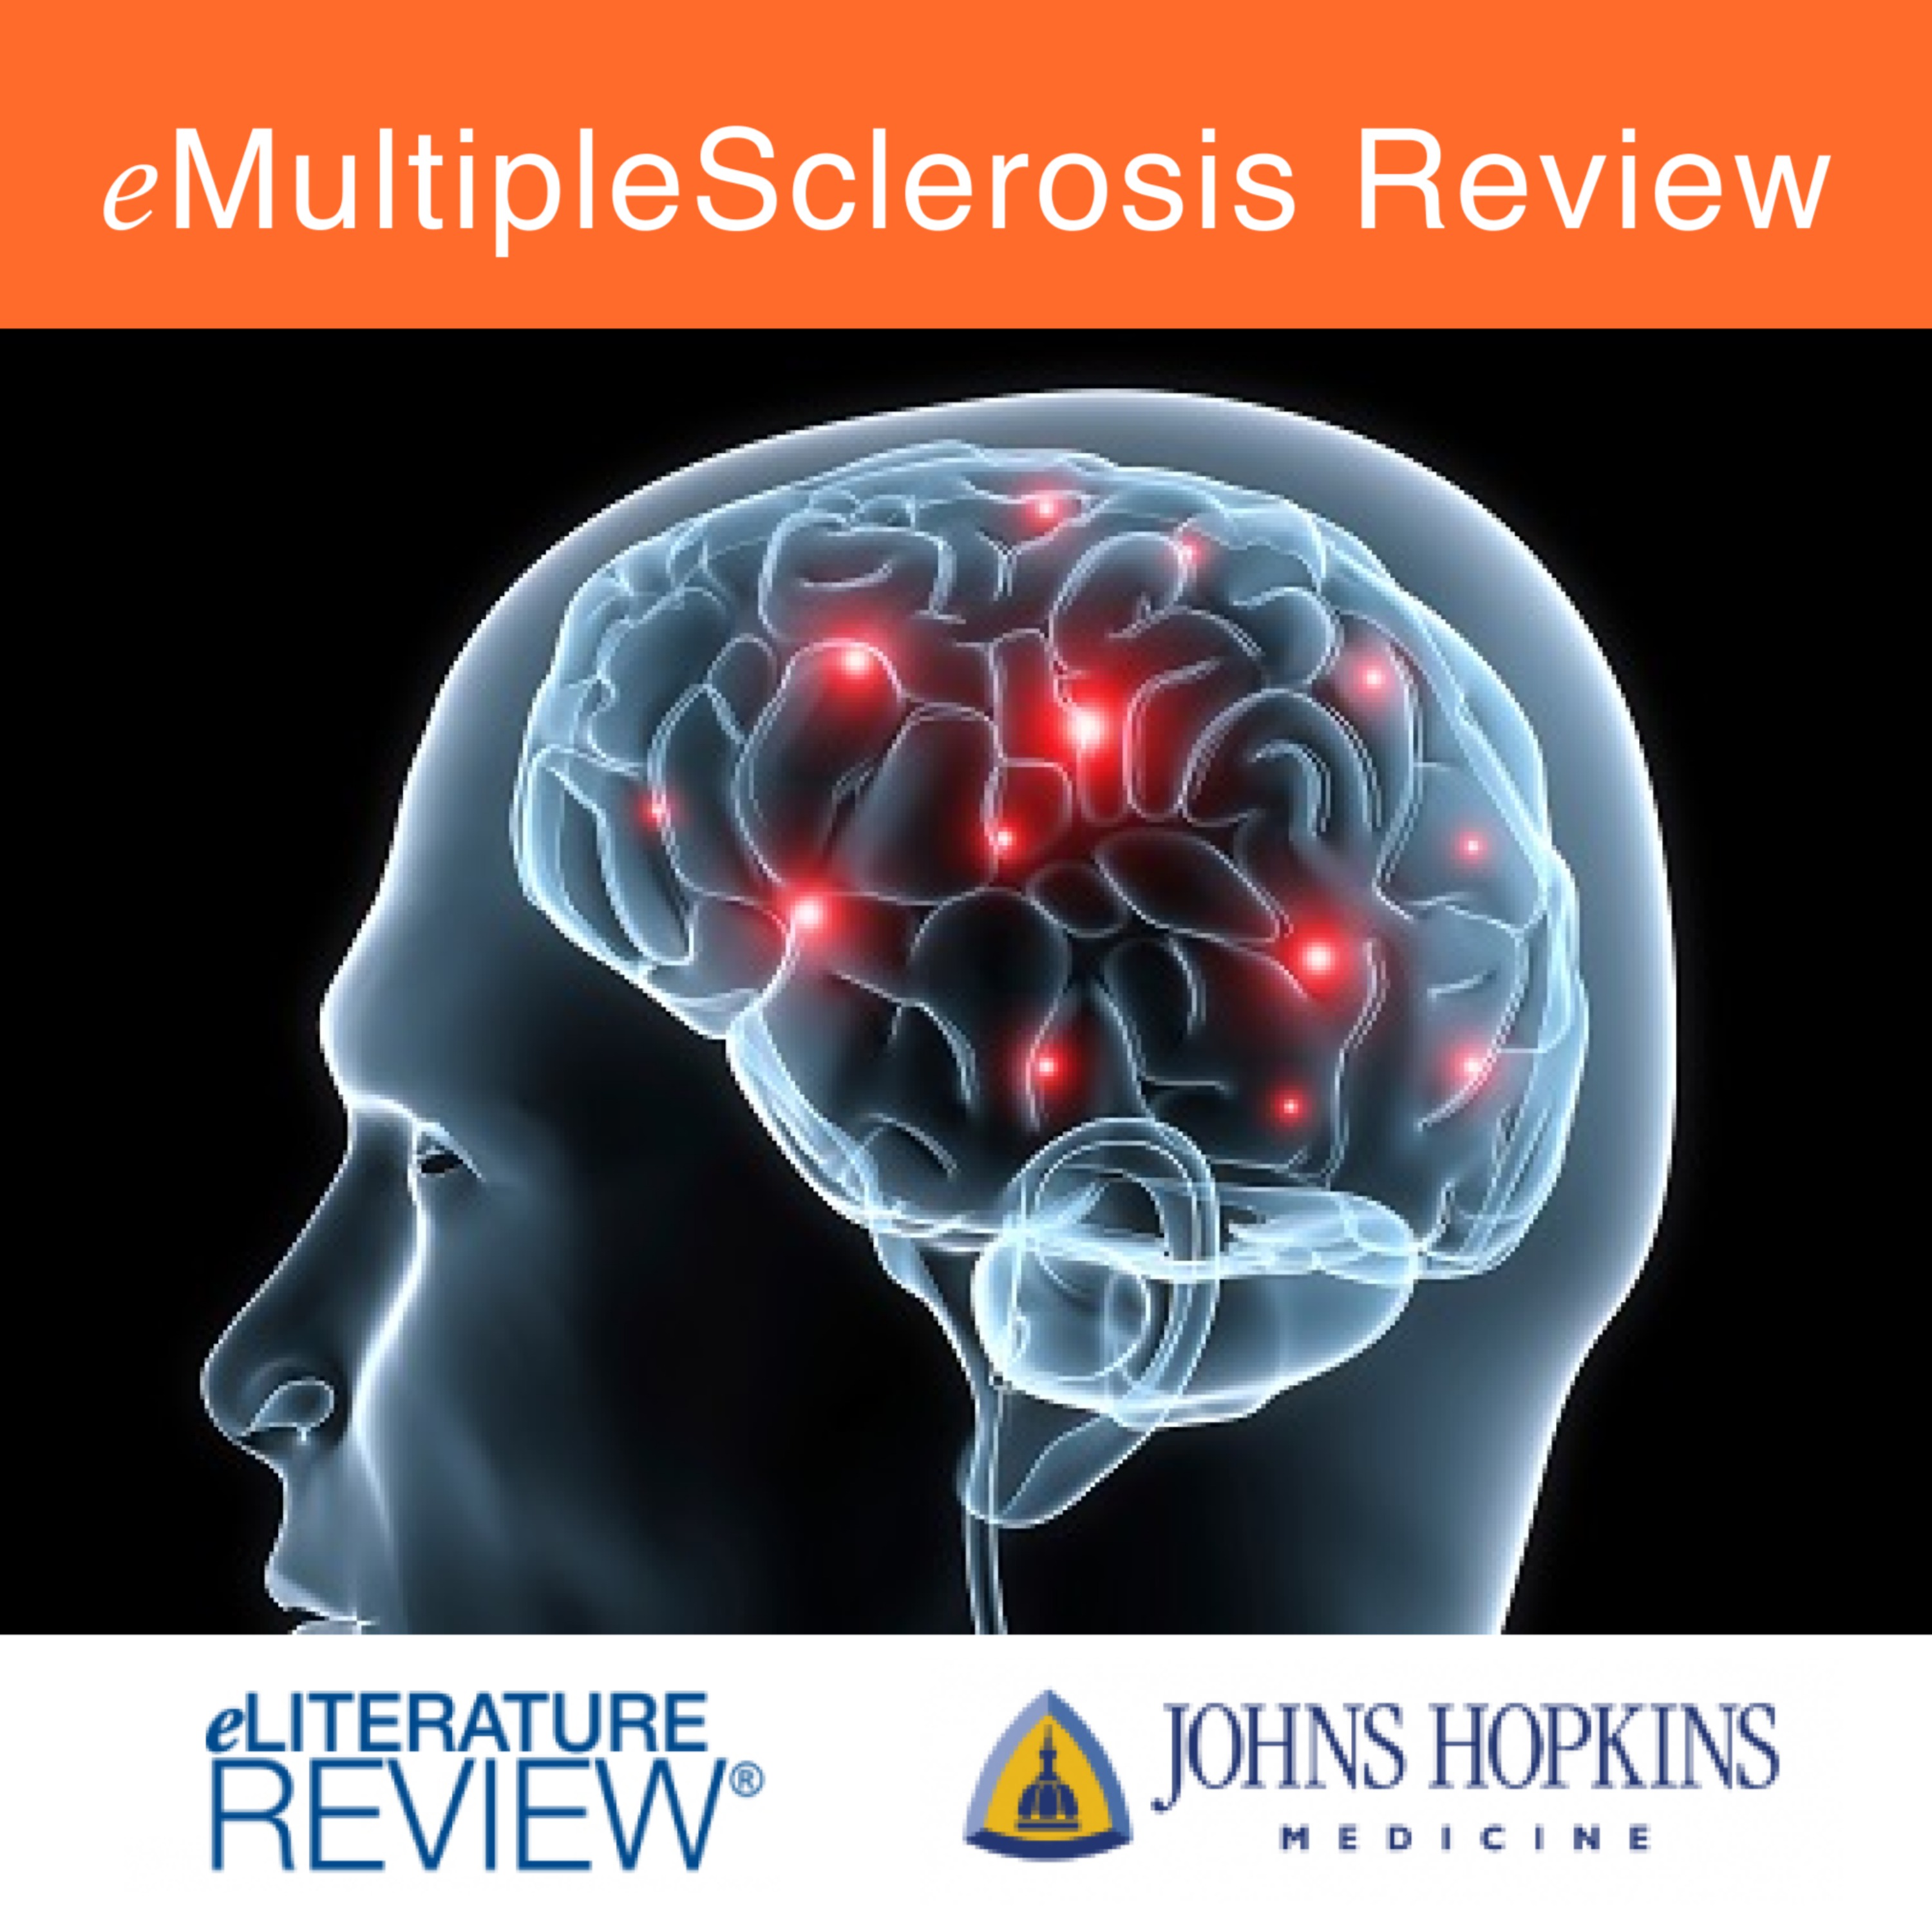 eMultipleSclerosis Review